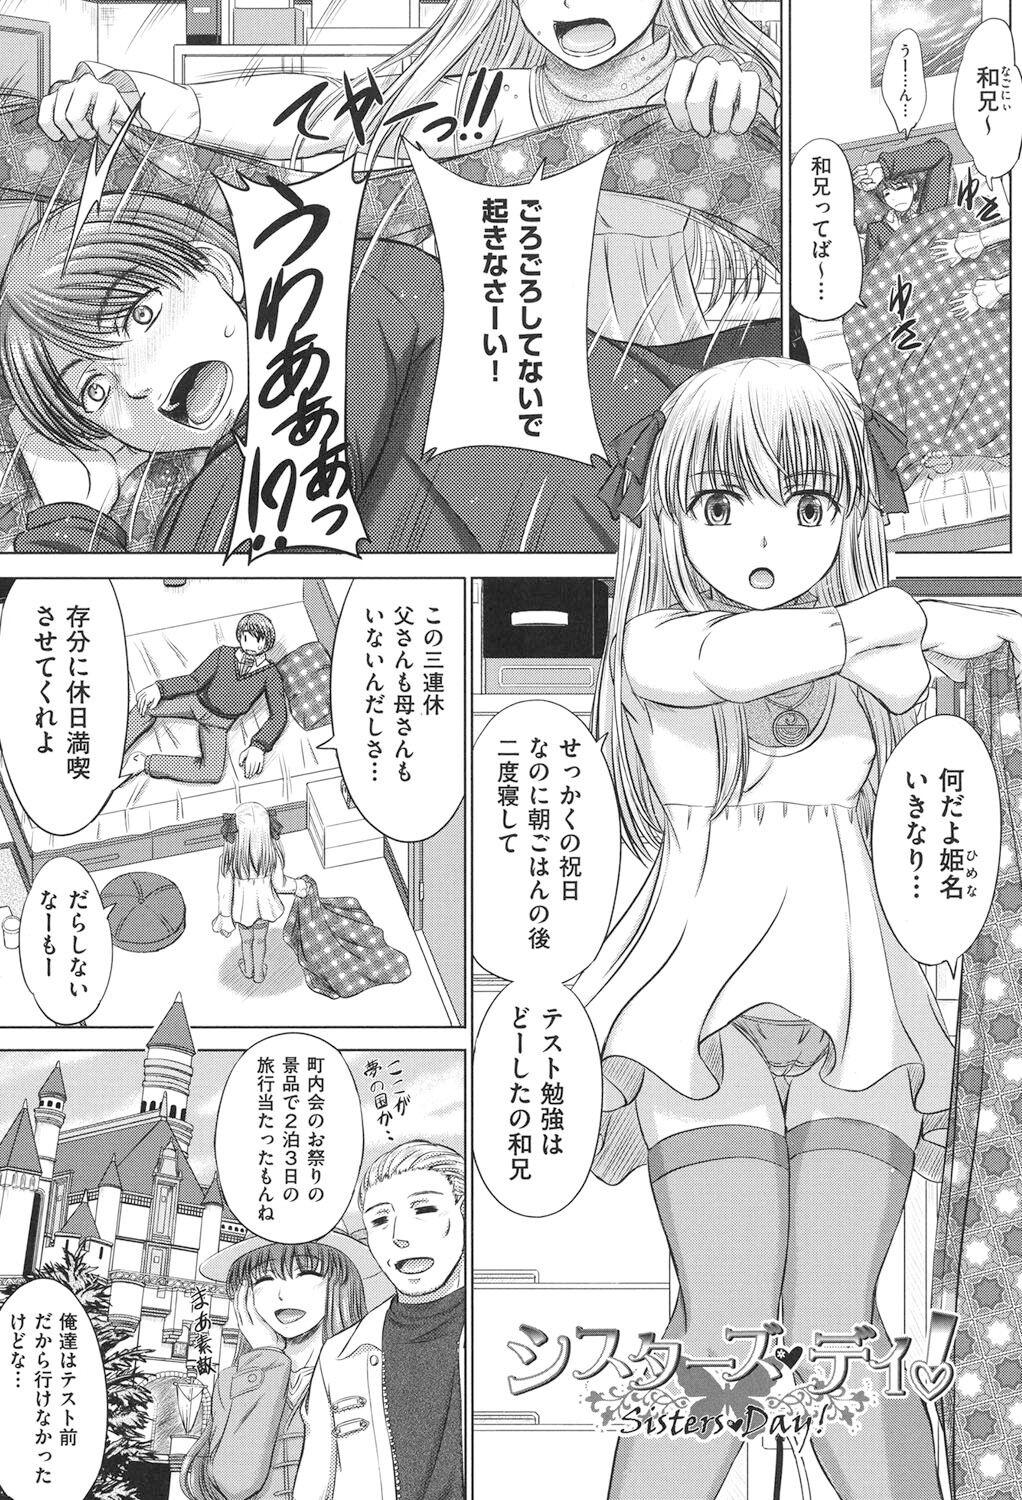 Houkago Kouhai Note - After School Mating Notes 3